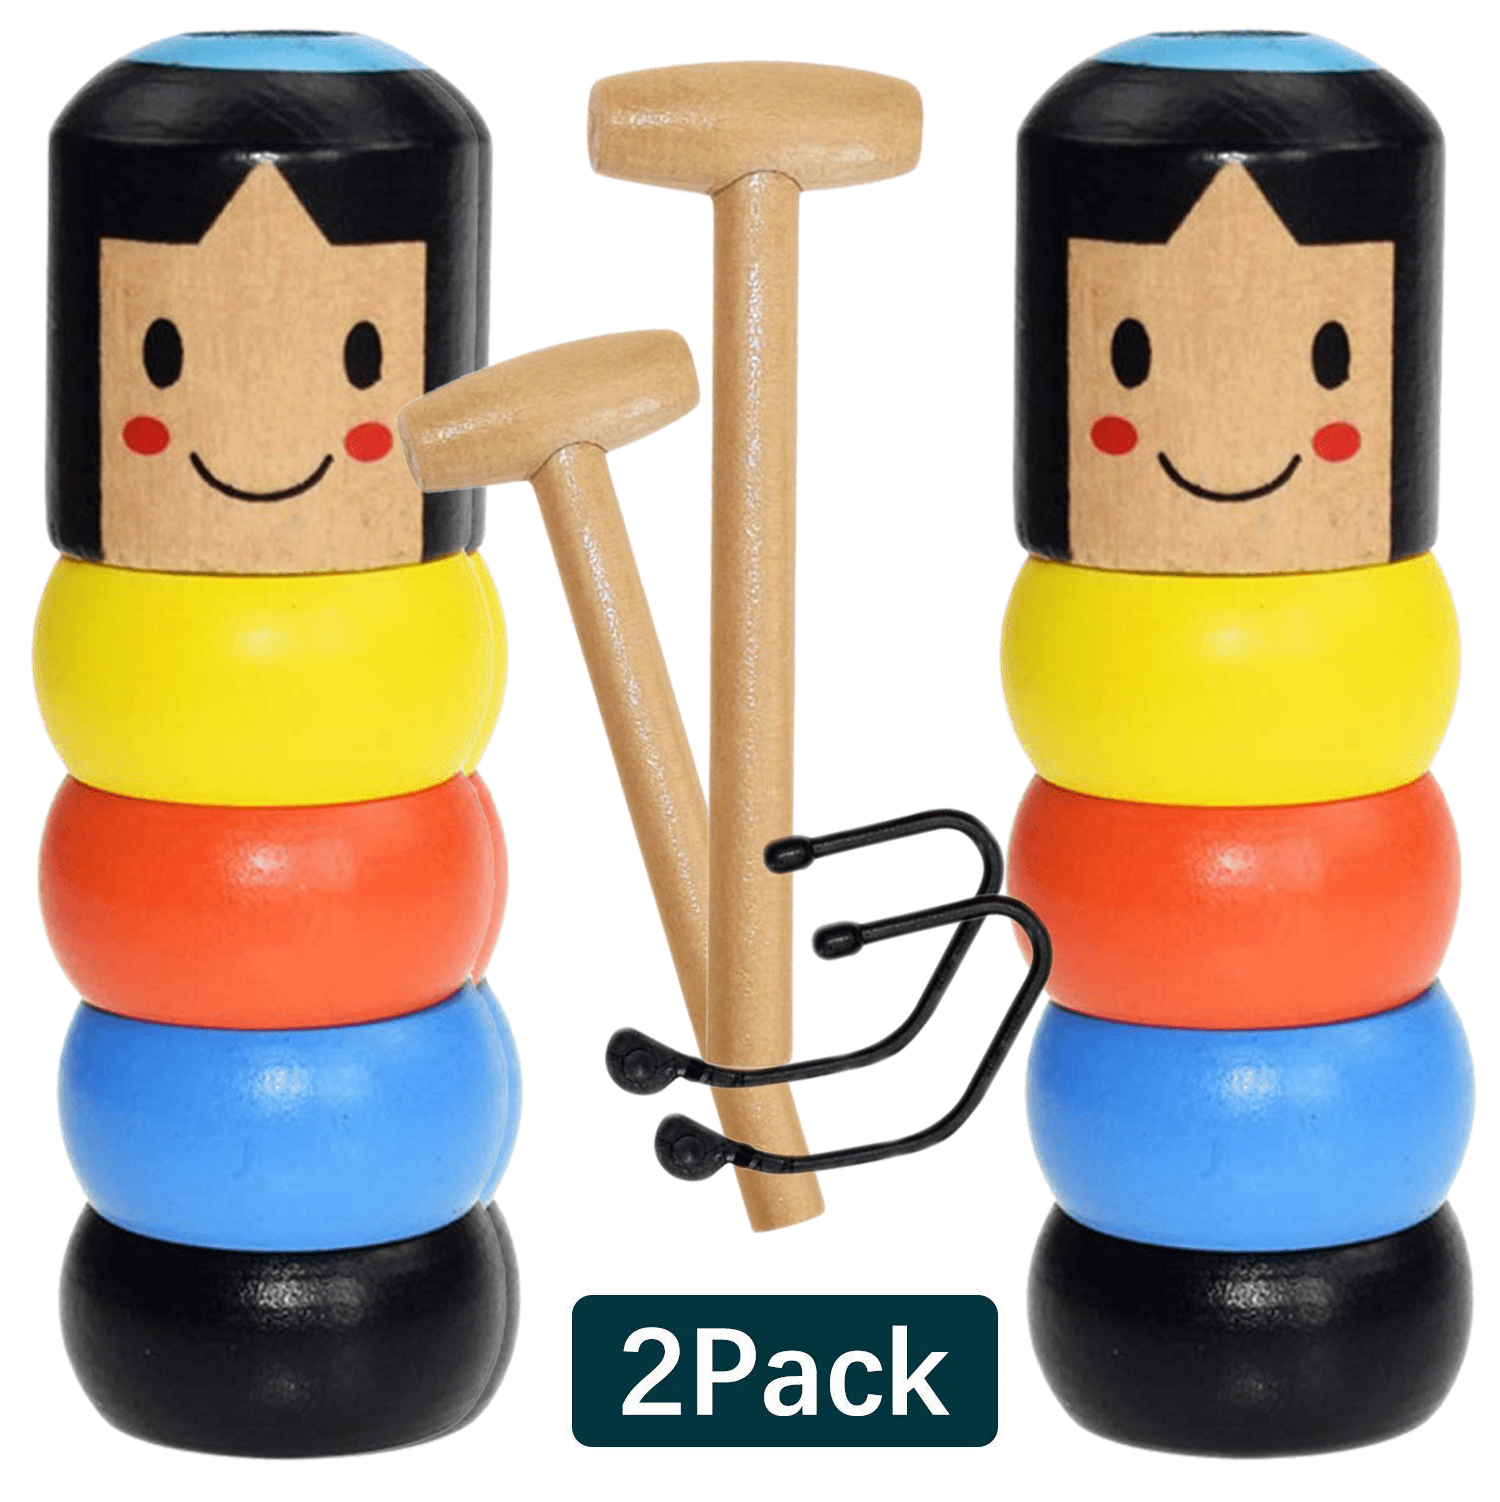 UNBREAKABLE WOODEN MAN MAGIC TOY For KIDS GIFTS NEW R2D8 